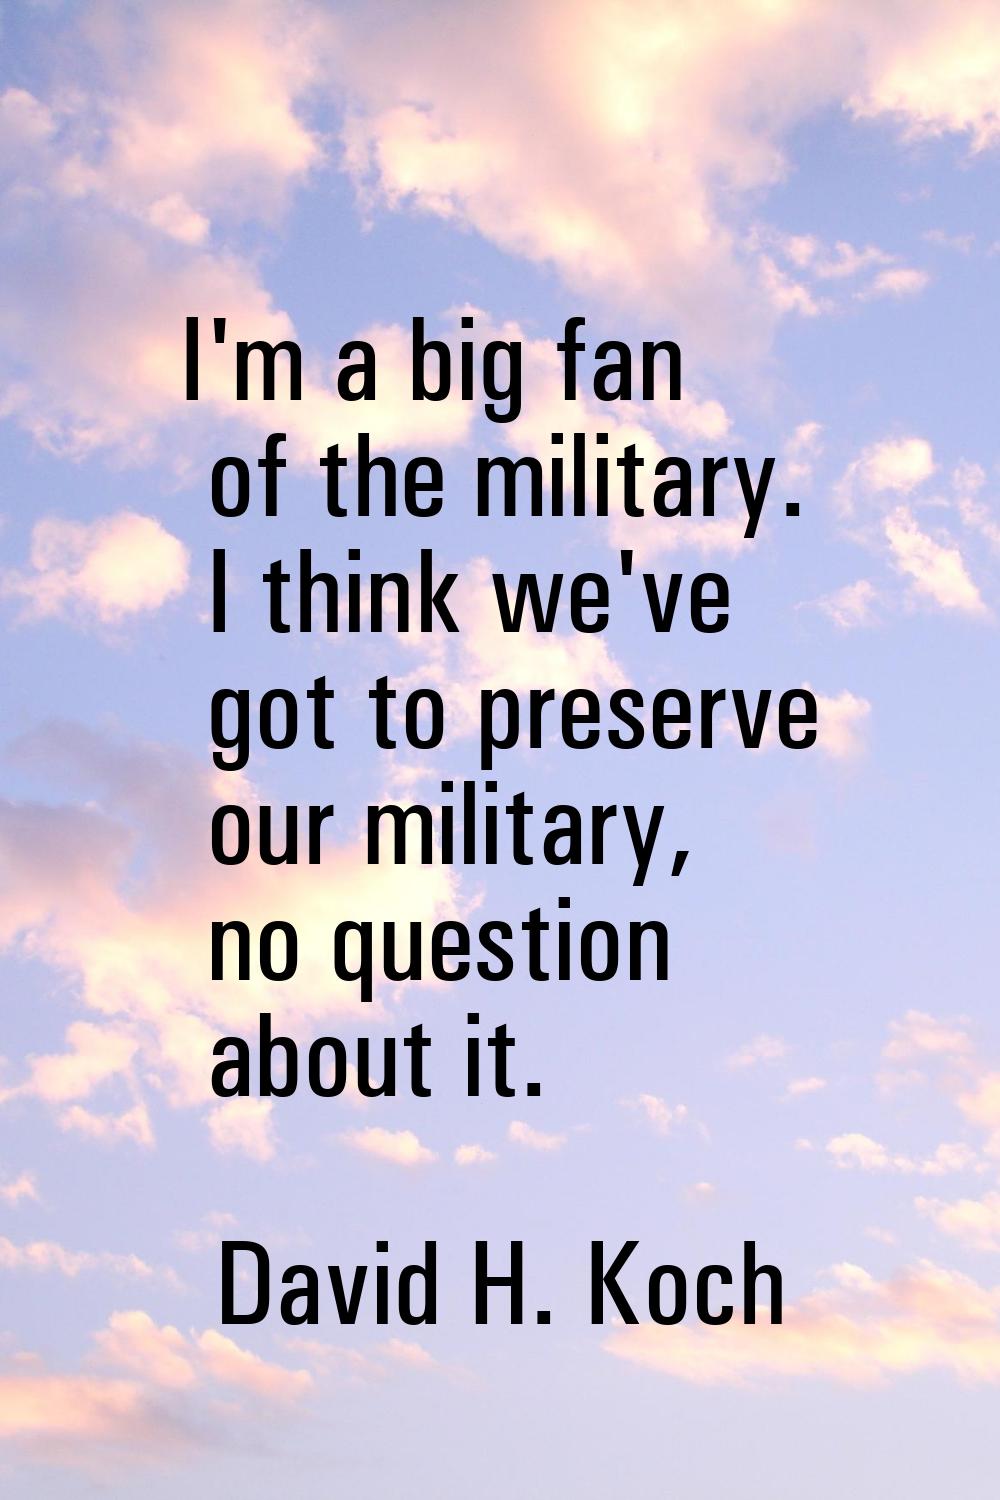 I'm a big fan of the military. I think we've got to preserve our military, no question about it.